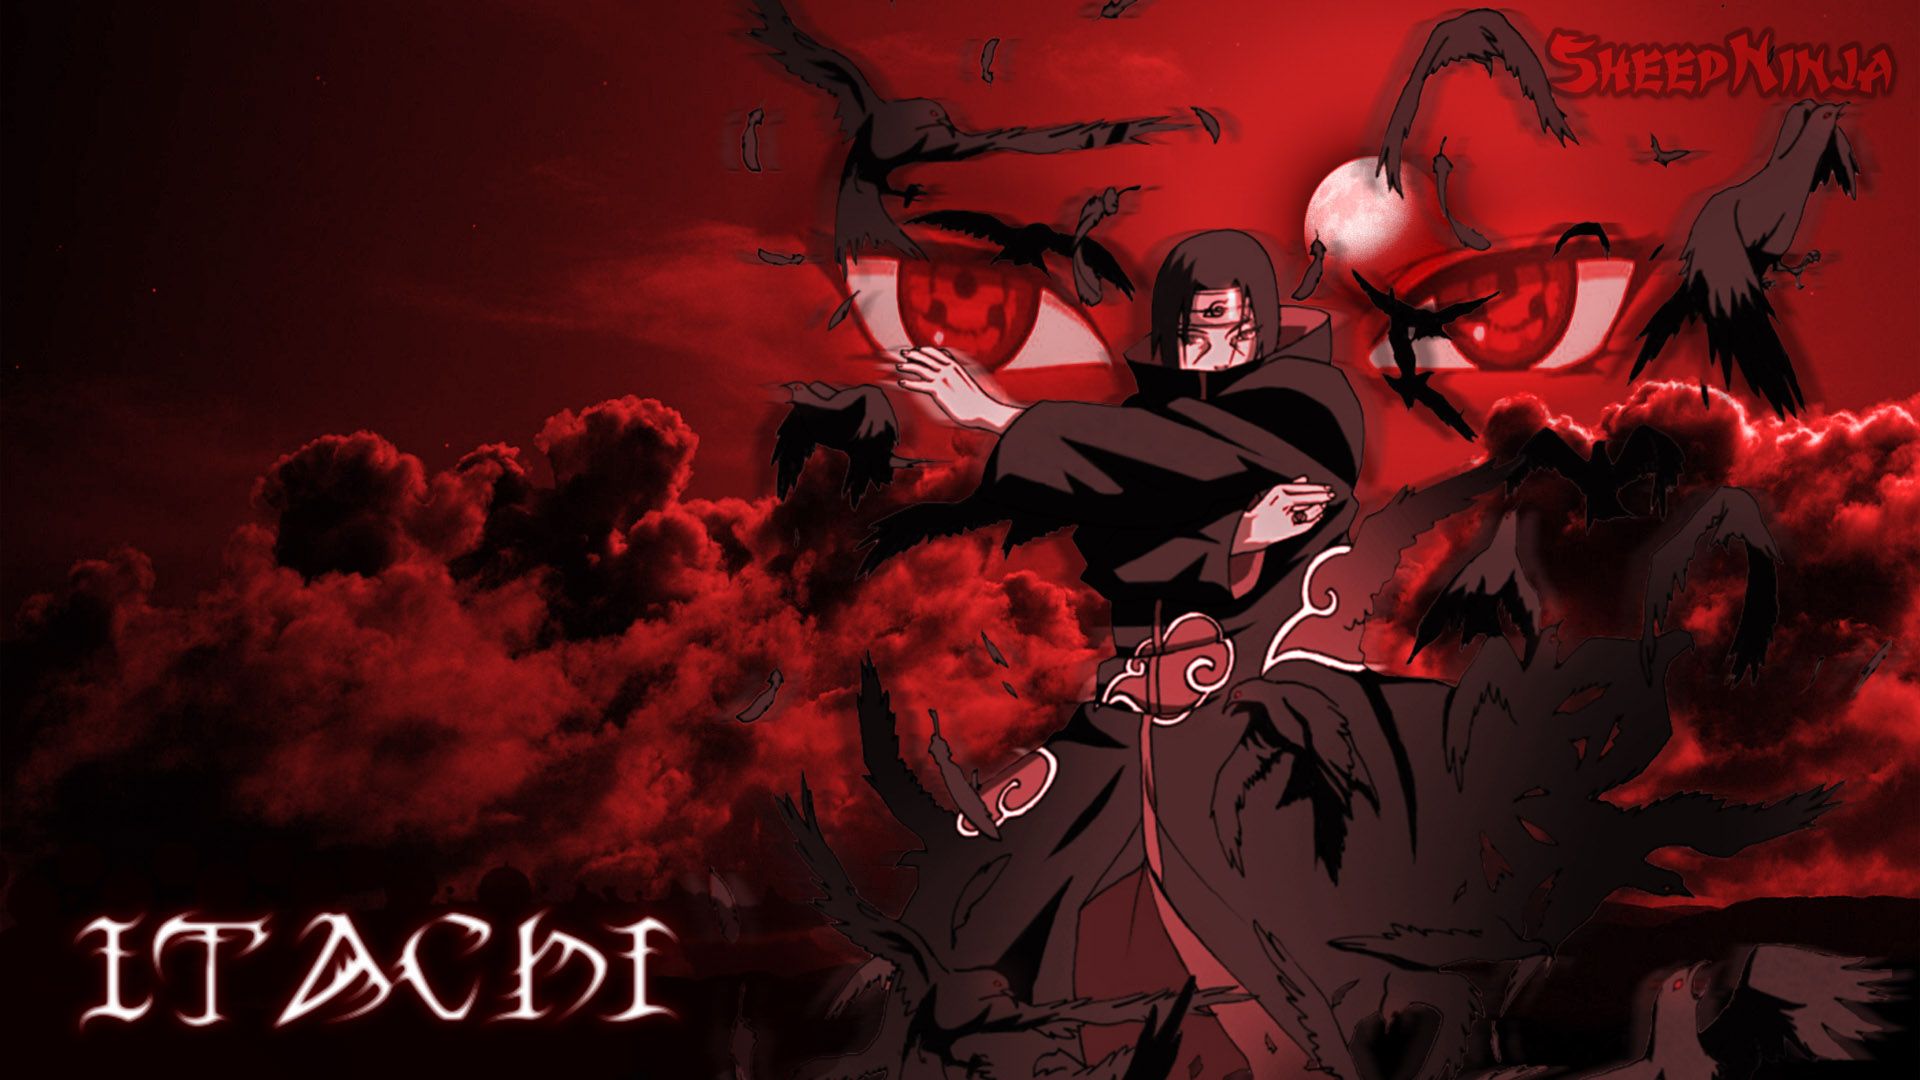 Free Download Download Itachi Wallpapers 1920x1080 For Your Desktop Mobile Tablet Explore 75 Itachi Hd Wallpaper Itachi Wallpapers Itachi Uchiha Wallpaper Hd Naruto Wallpaper